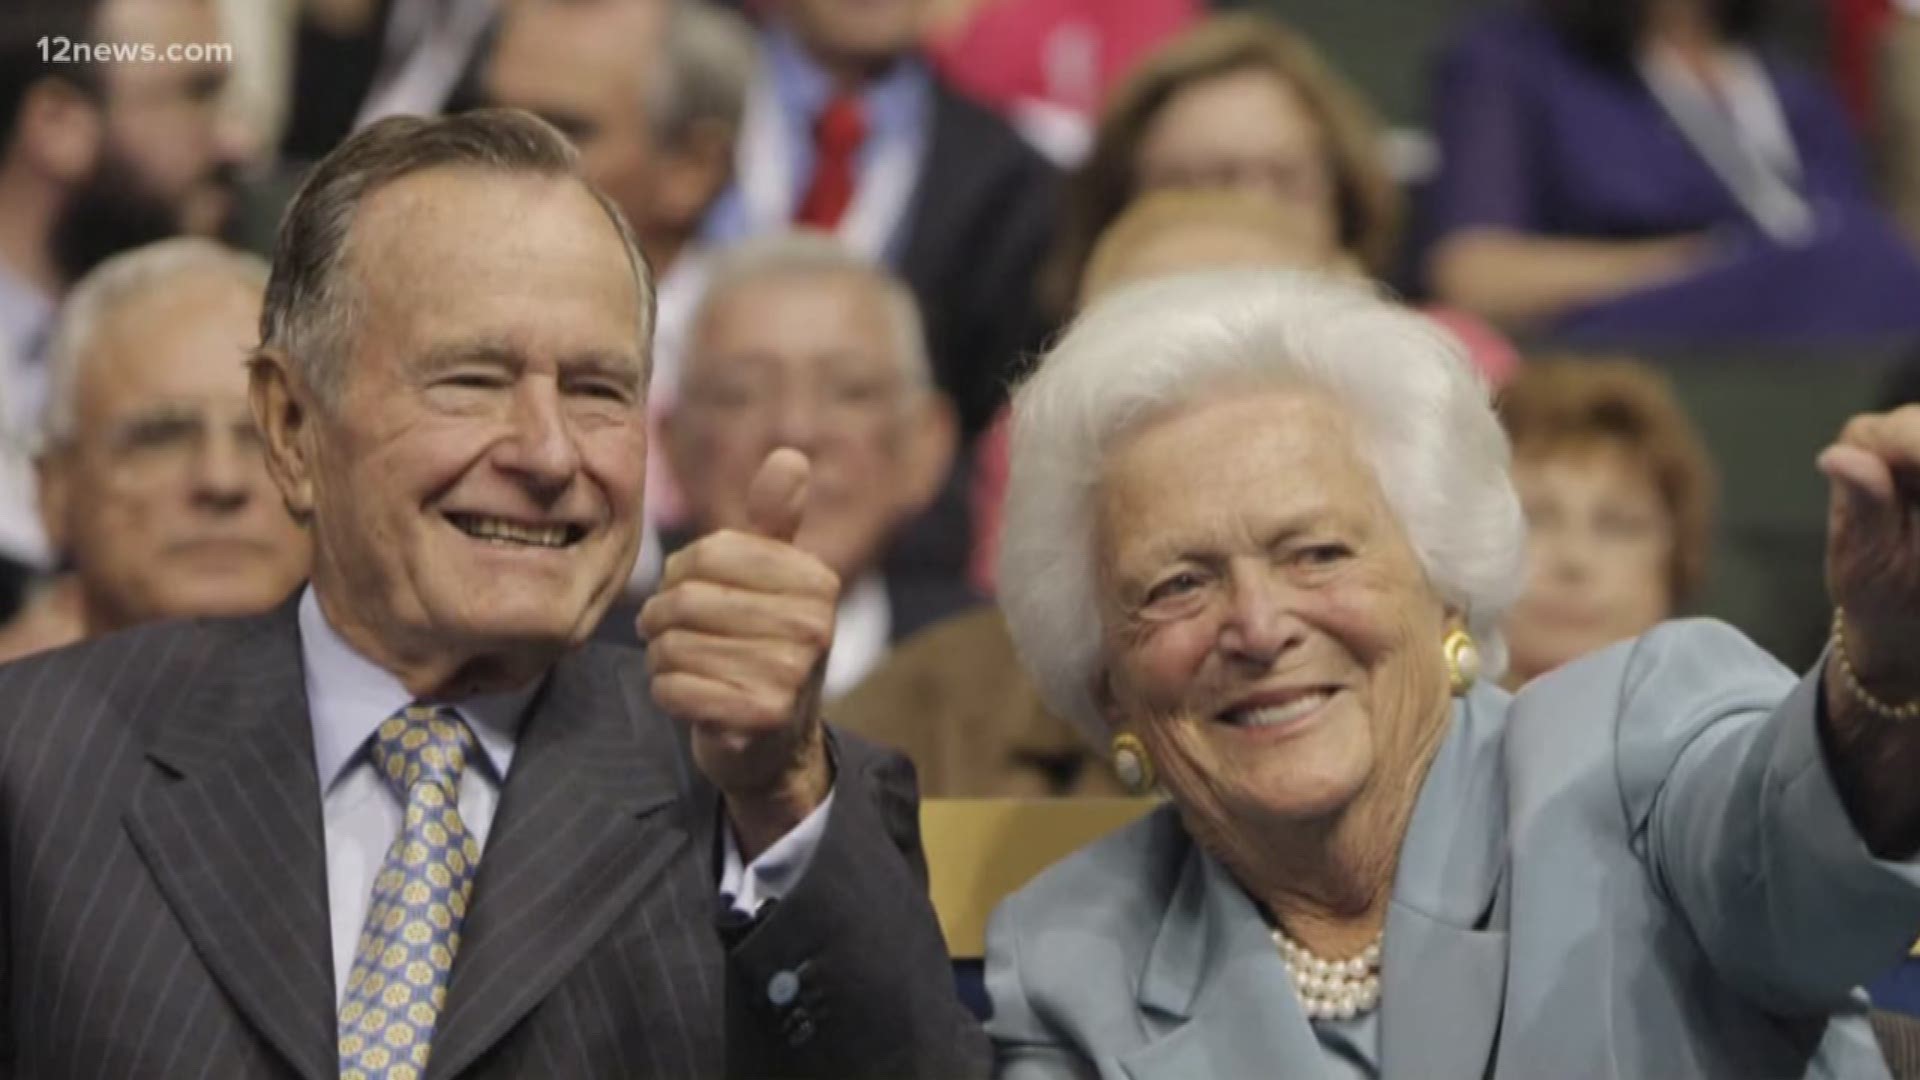 George H.W. Bush died just eight months after his wife, Barbara Bush. Some are suggesting that a broken heart may have contributed to the president's death. We look into if it is possible to die from a broken heart.